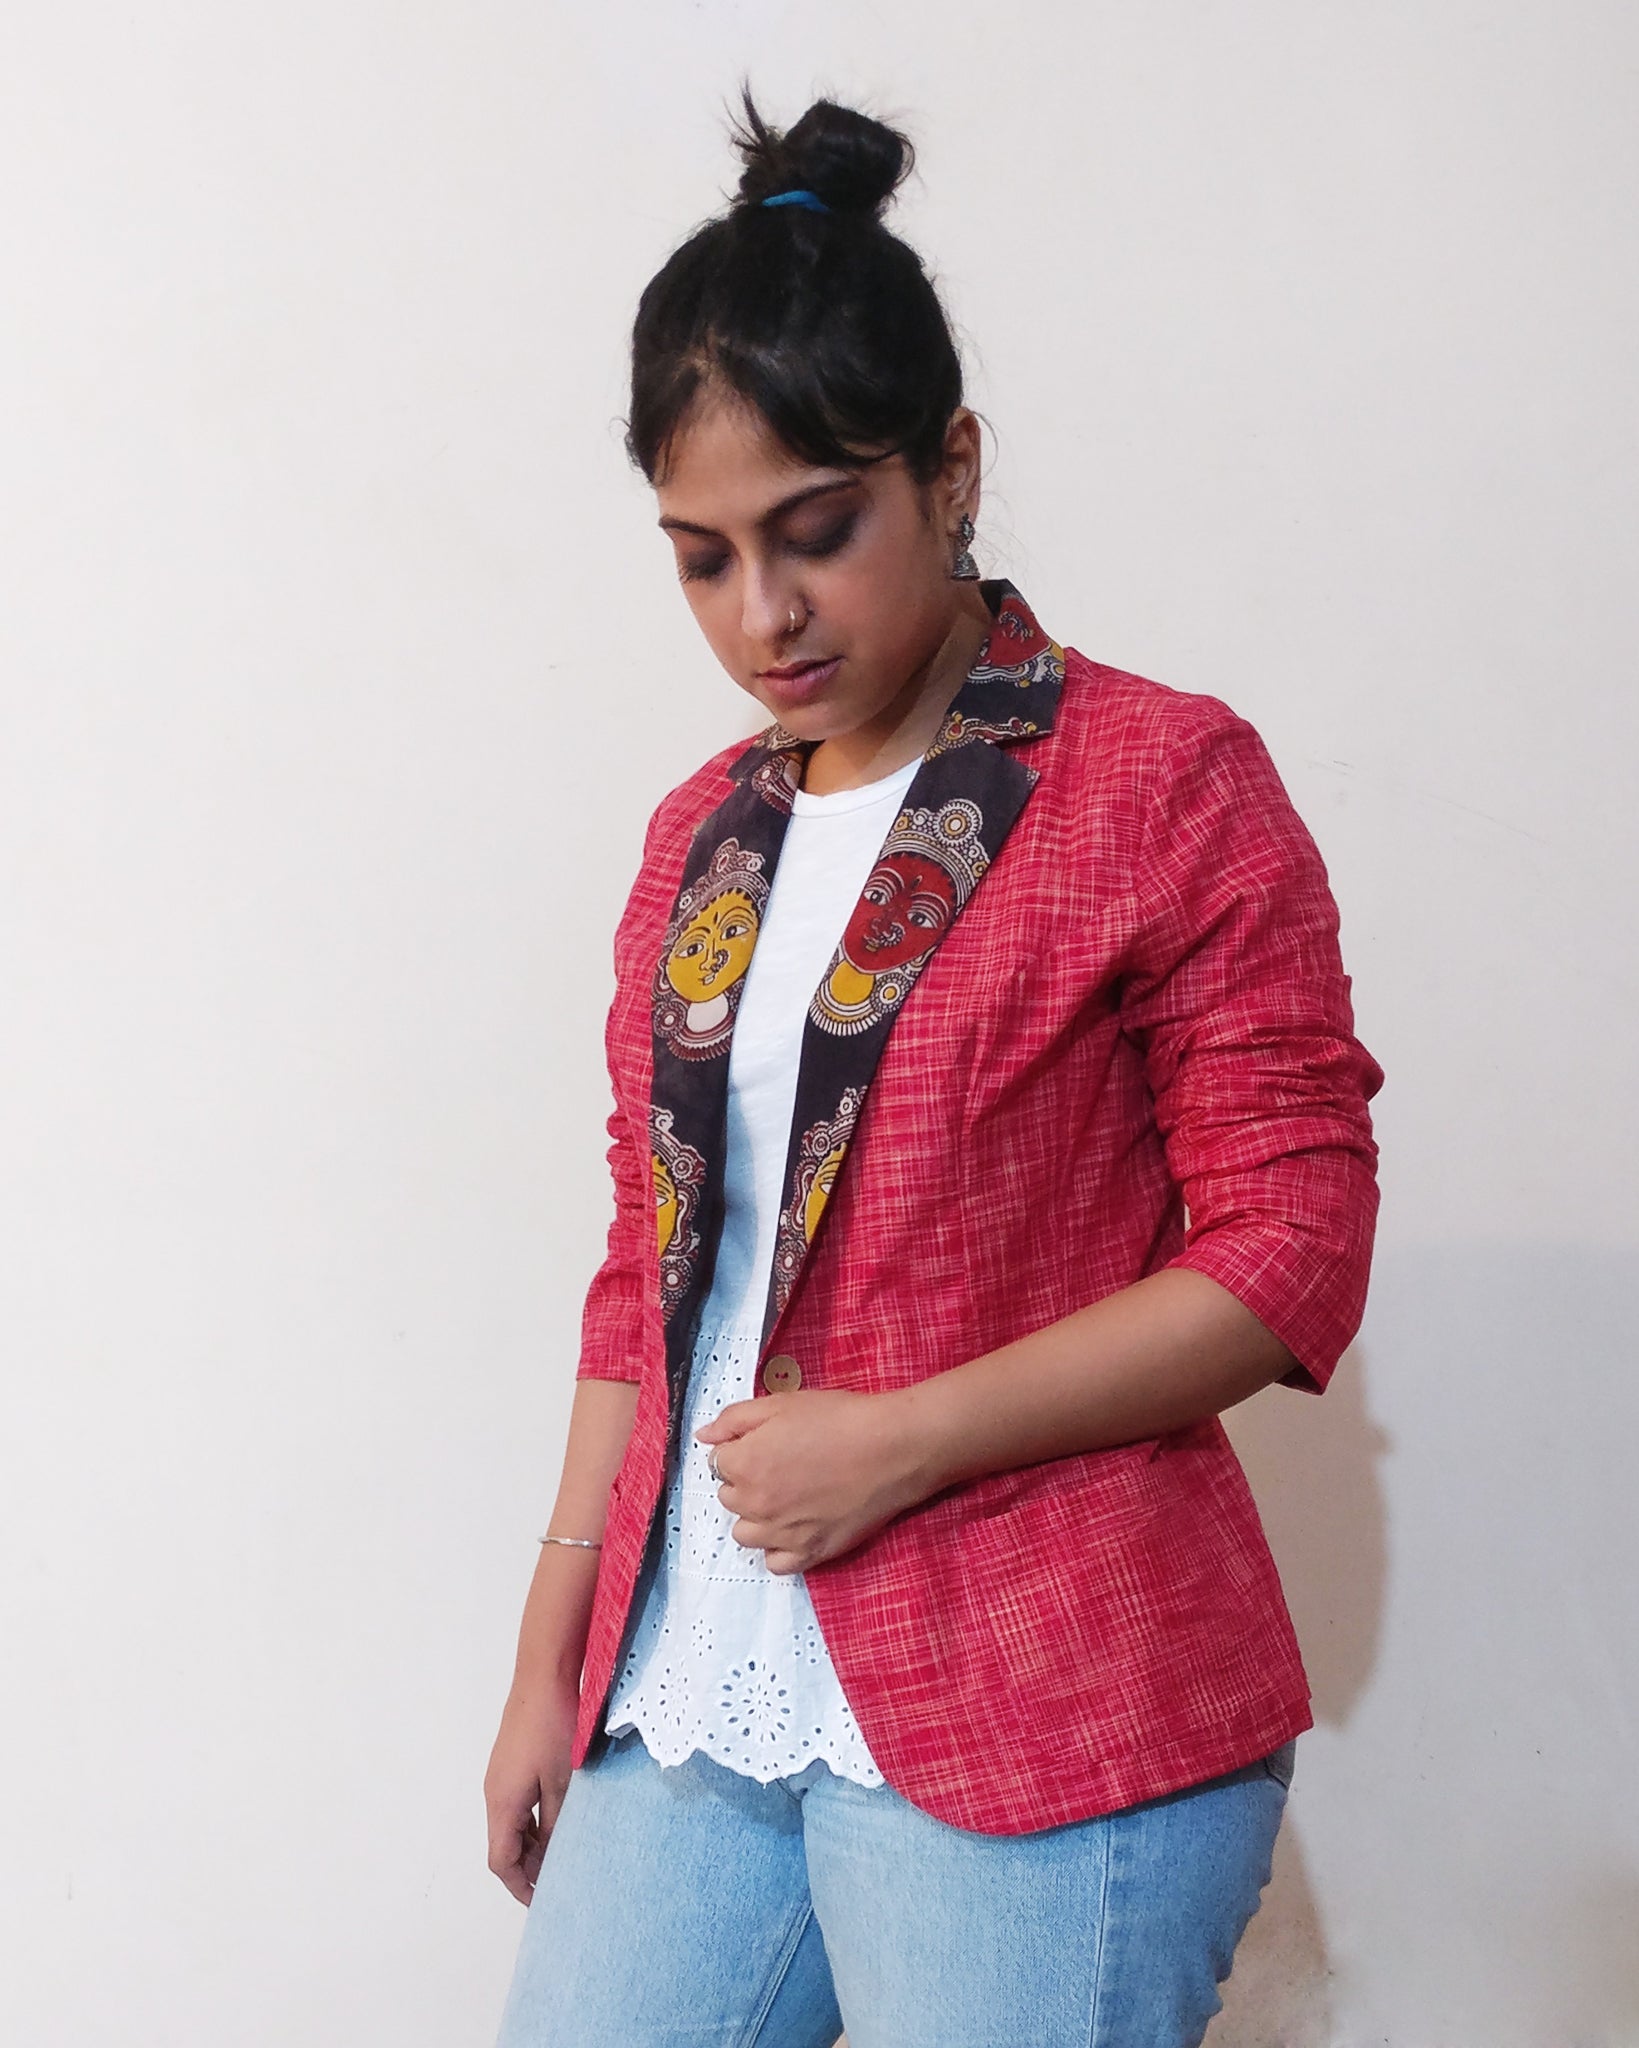 The red in this red Khadi is not so vivid, you feel power without being overwhelmed. With cute black Kalamkari print on the collar. Super cute power suit from women's body base pattern. Buy online! (profile photo)